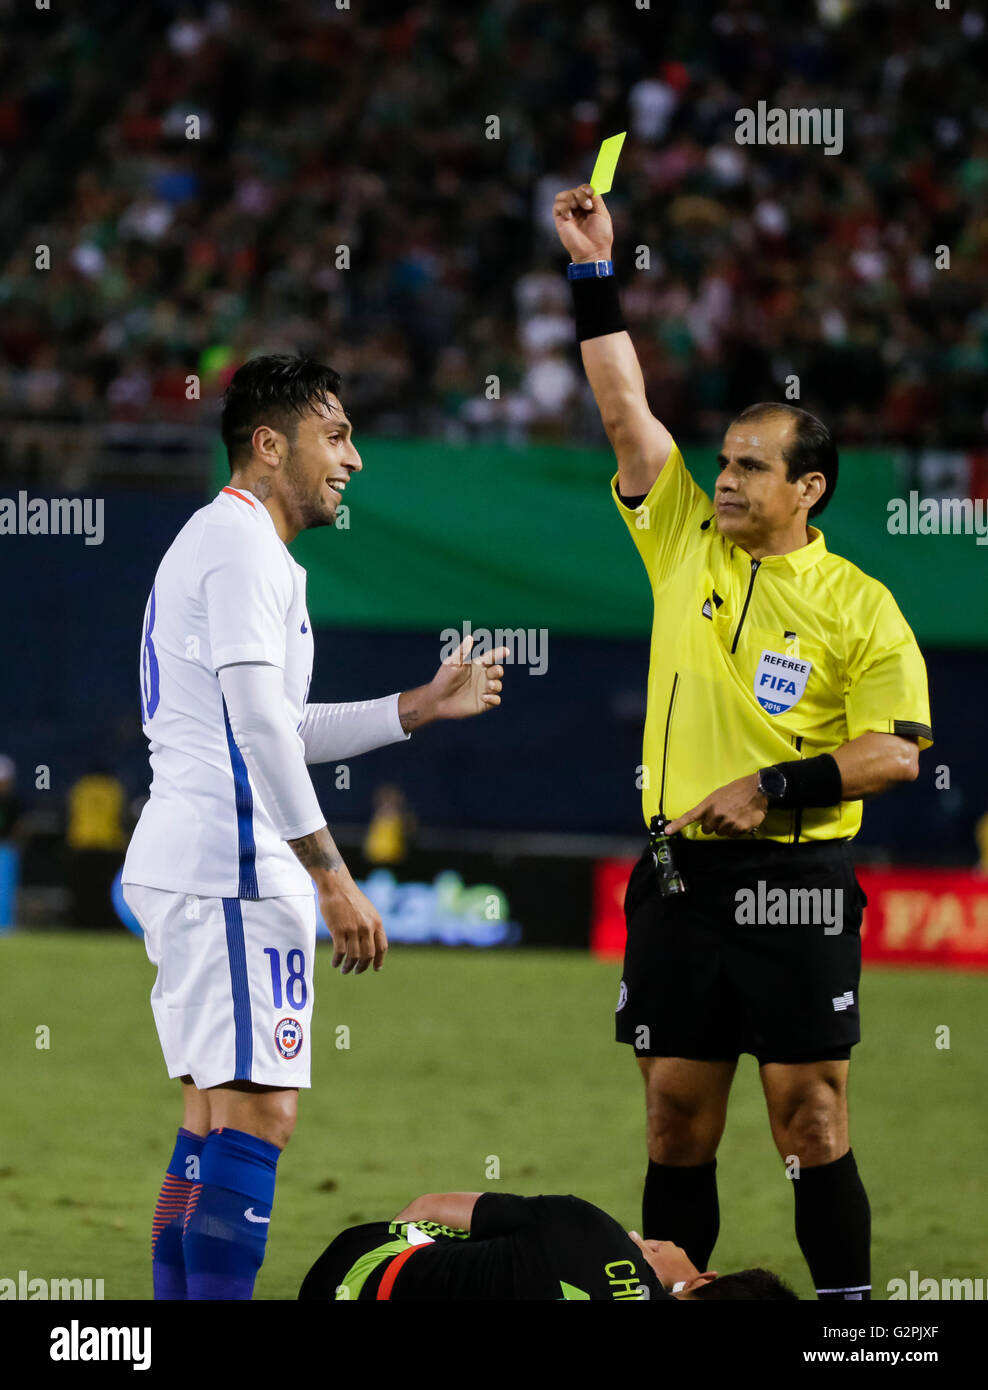 San Diego, California, USA. 01st June, 2016. Chilean #18 Gonzalo Jara is yellow carded for his penalty against Mexican Forward #14 Javier ''Chicharito'' Hernandez during an international soccer match between Mexico and Chile at Qualcomm Stadium in San Diego, California. Mexico defeats Chile 1-0. Justin Cooper/CSM/Alamy Live News Stock Photo